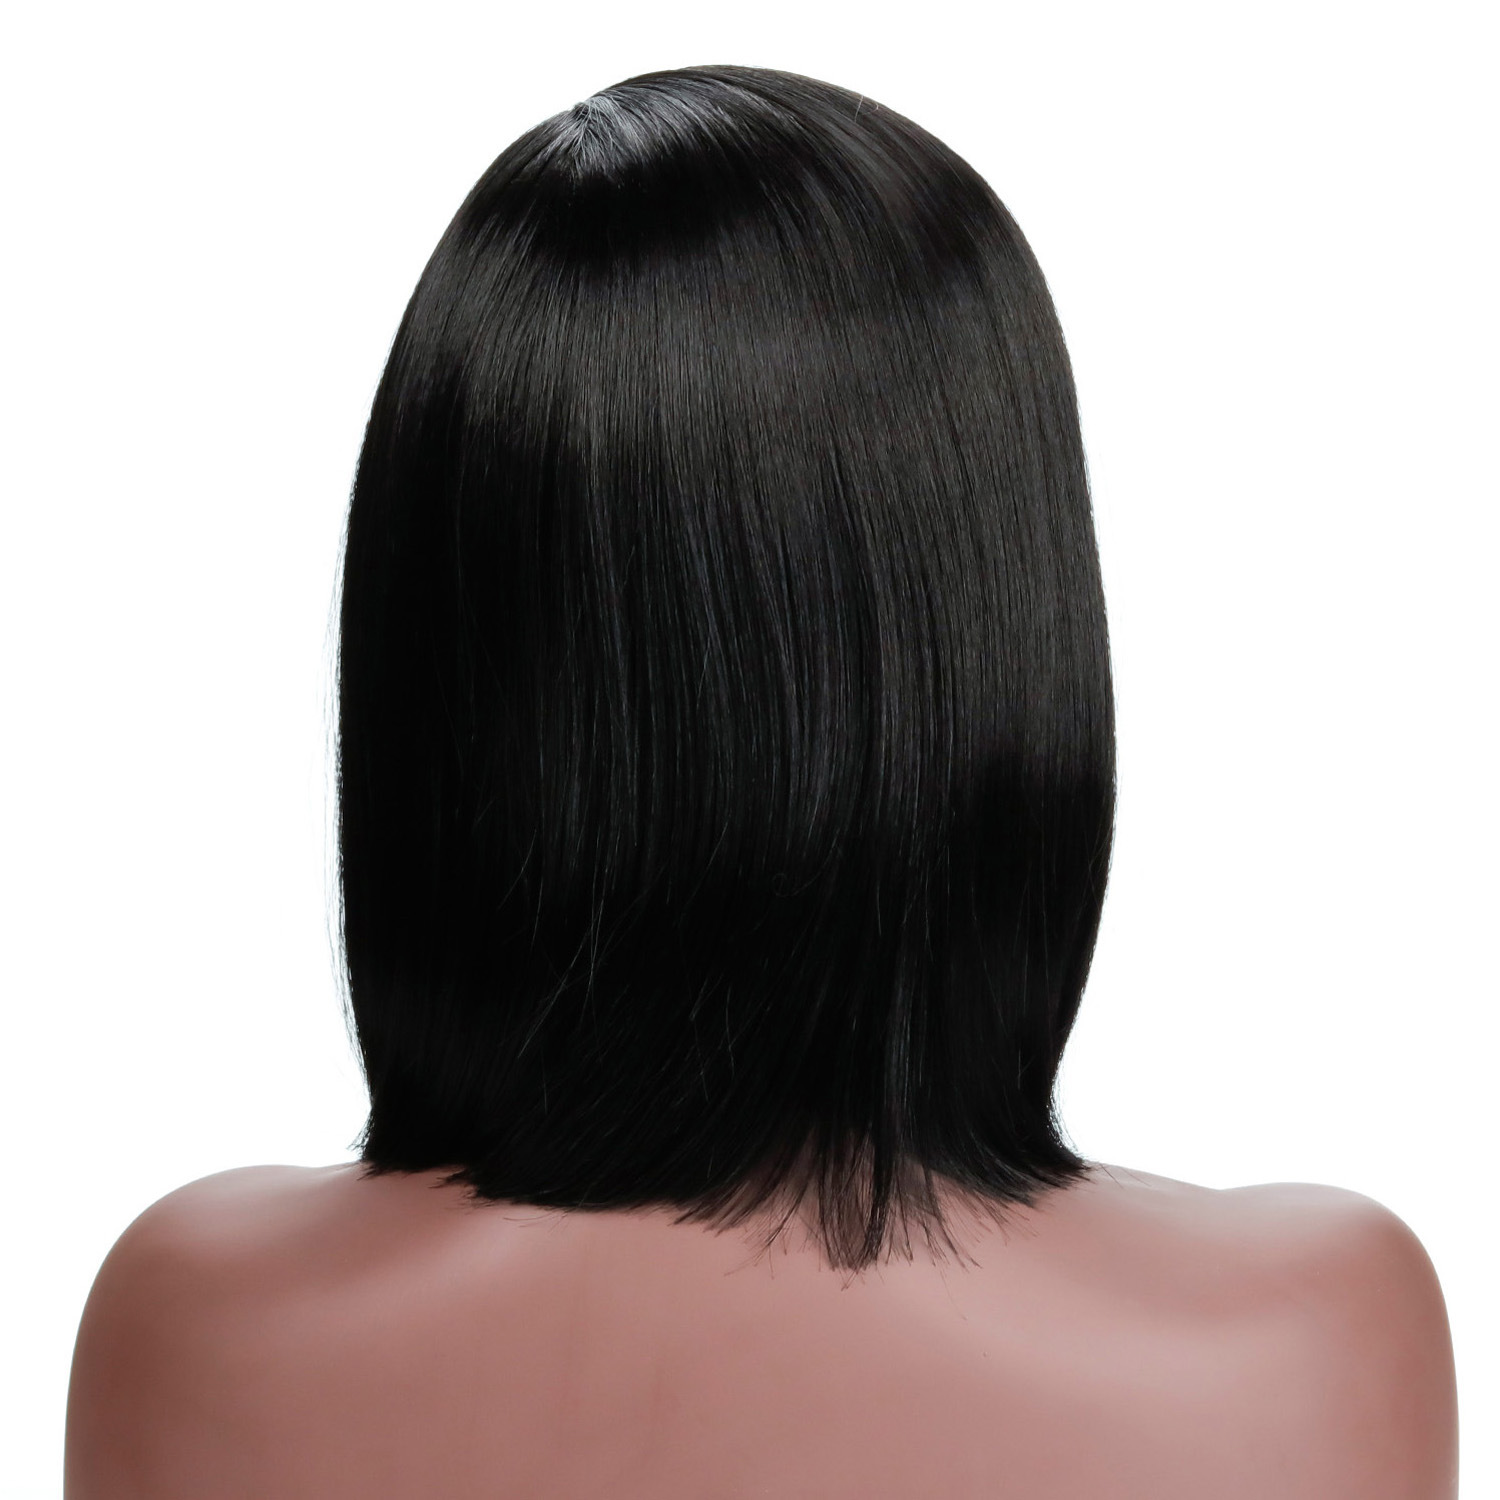 Image of a synthetic wig designed for women's fashion, featuring black straight hair of medium length